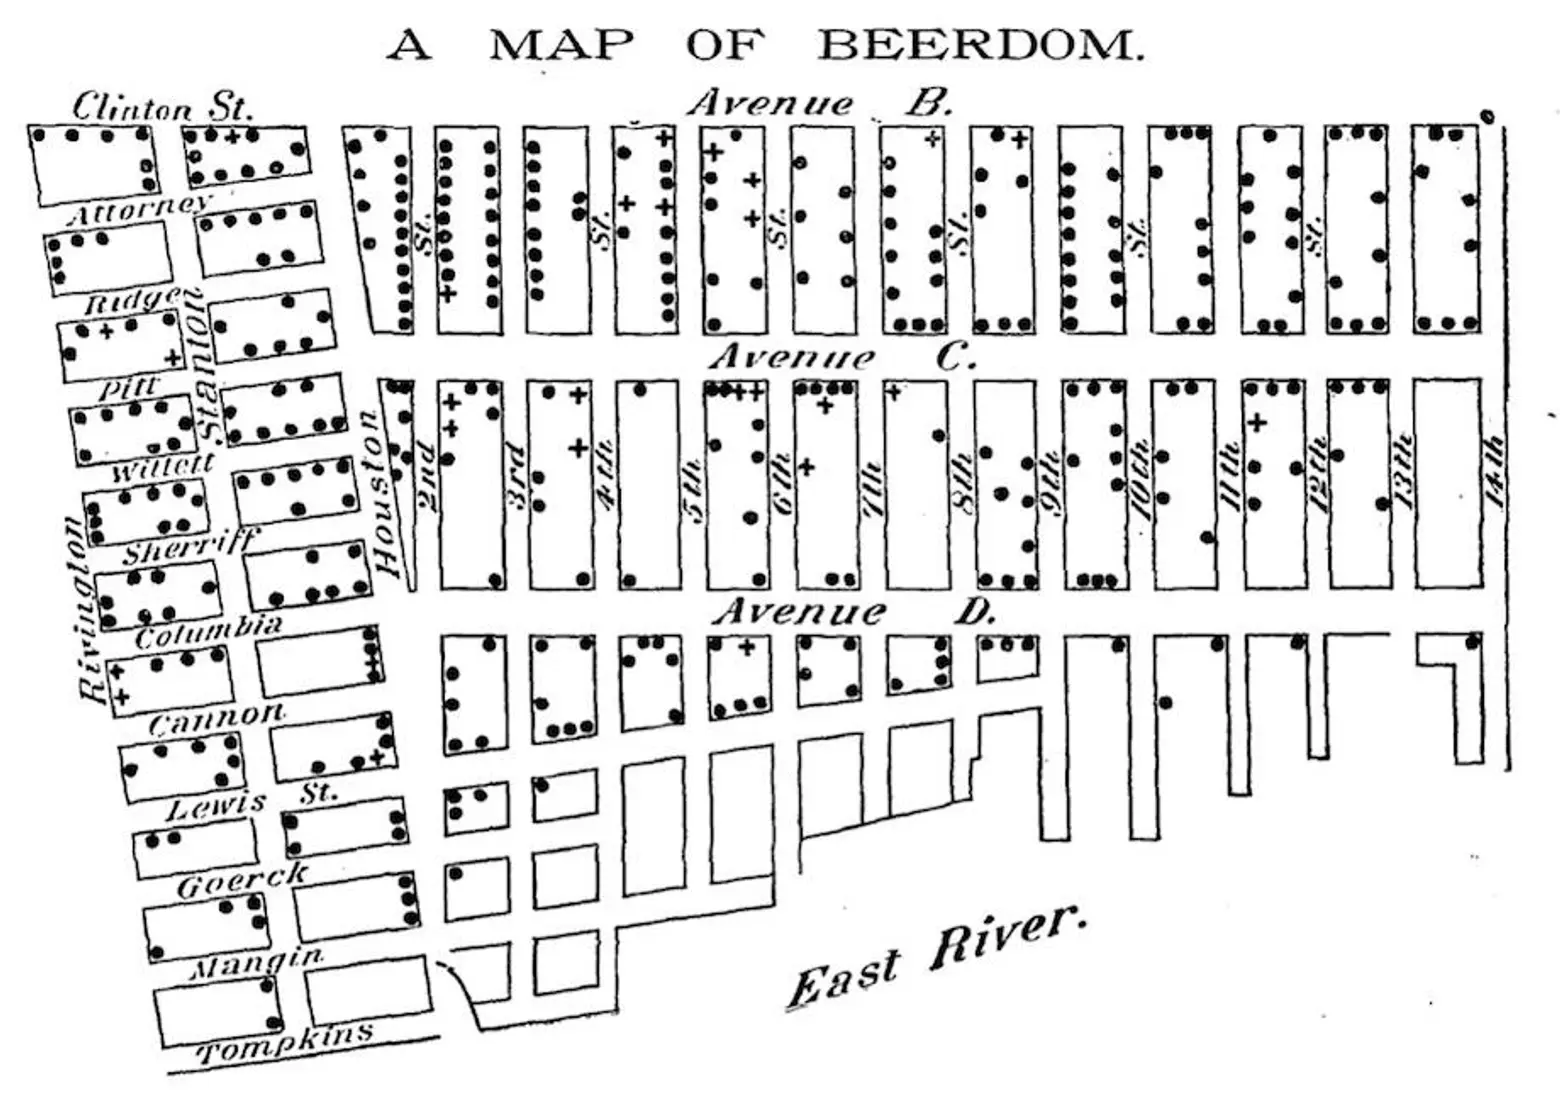 ‘Beerdom’ map shows 19th century Lower East Siders drank more